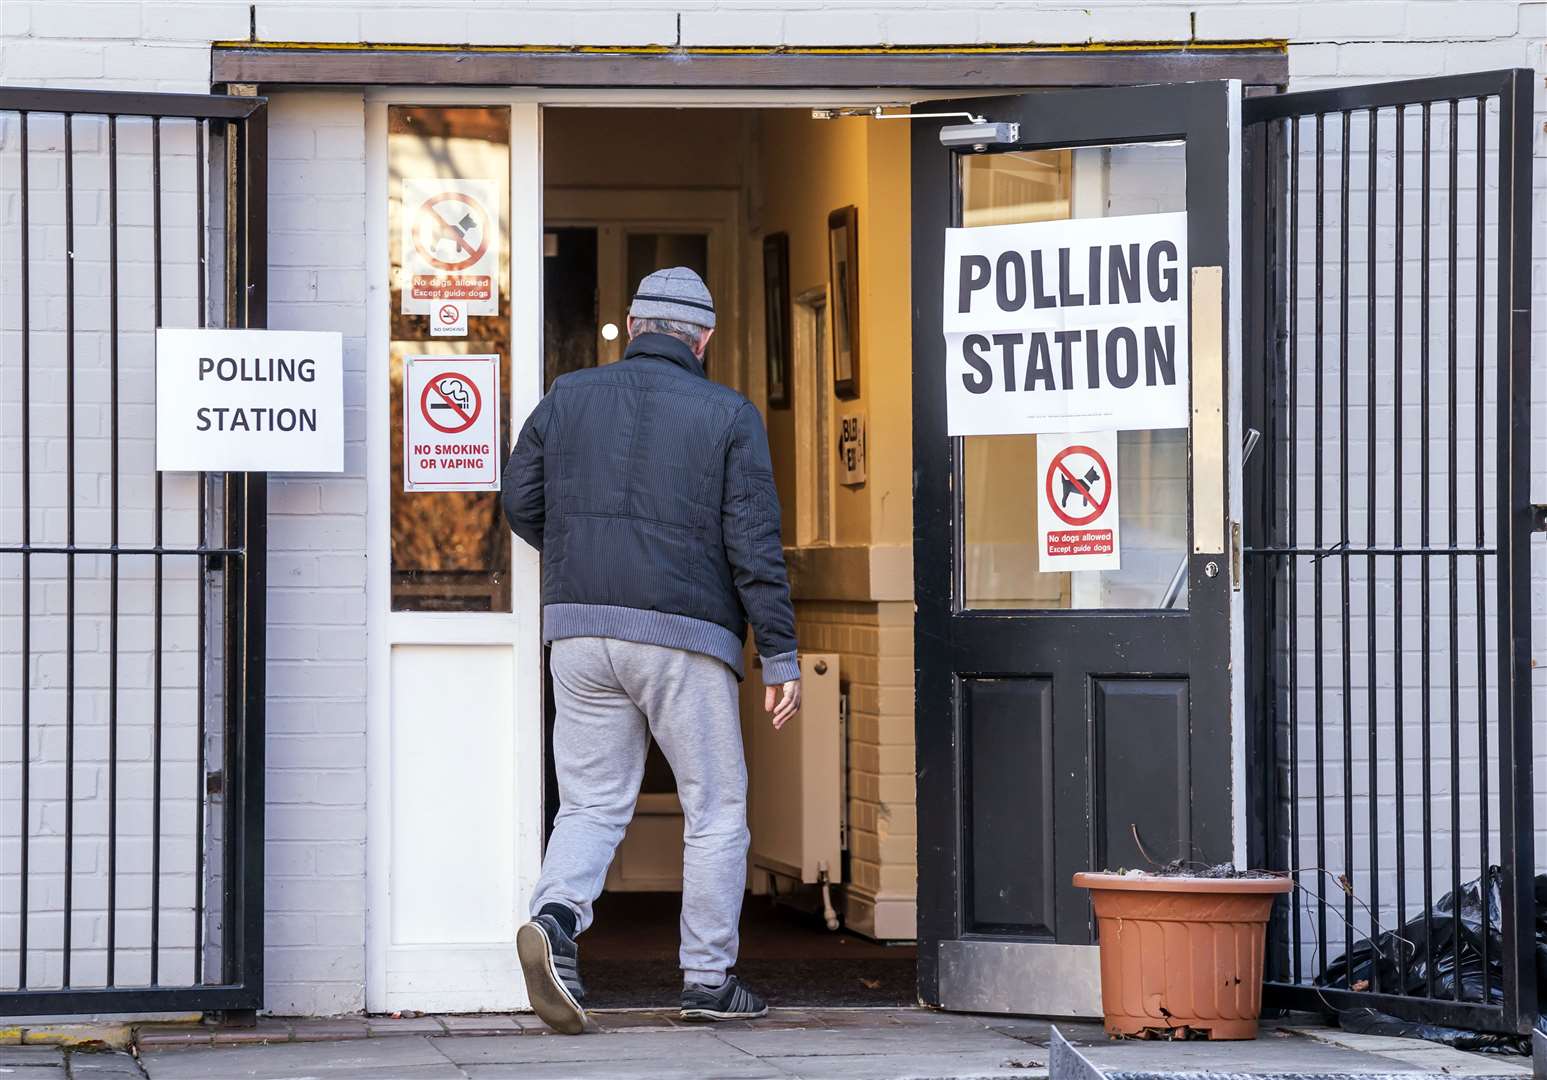 A man arrives at Sharon Youth Centre in Stretford to vote (Danny Lawson/PA)